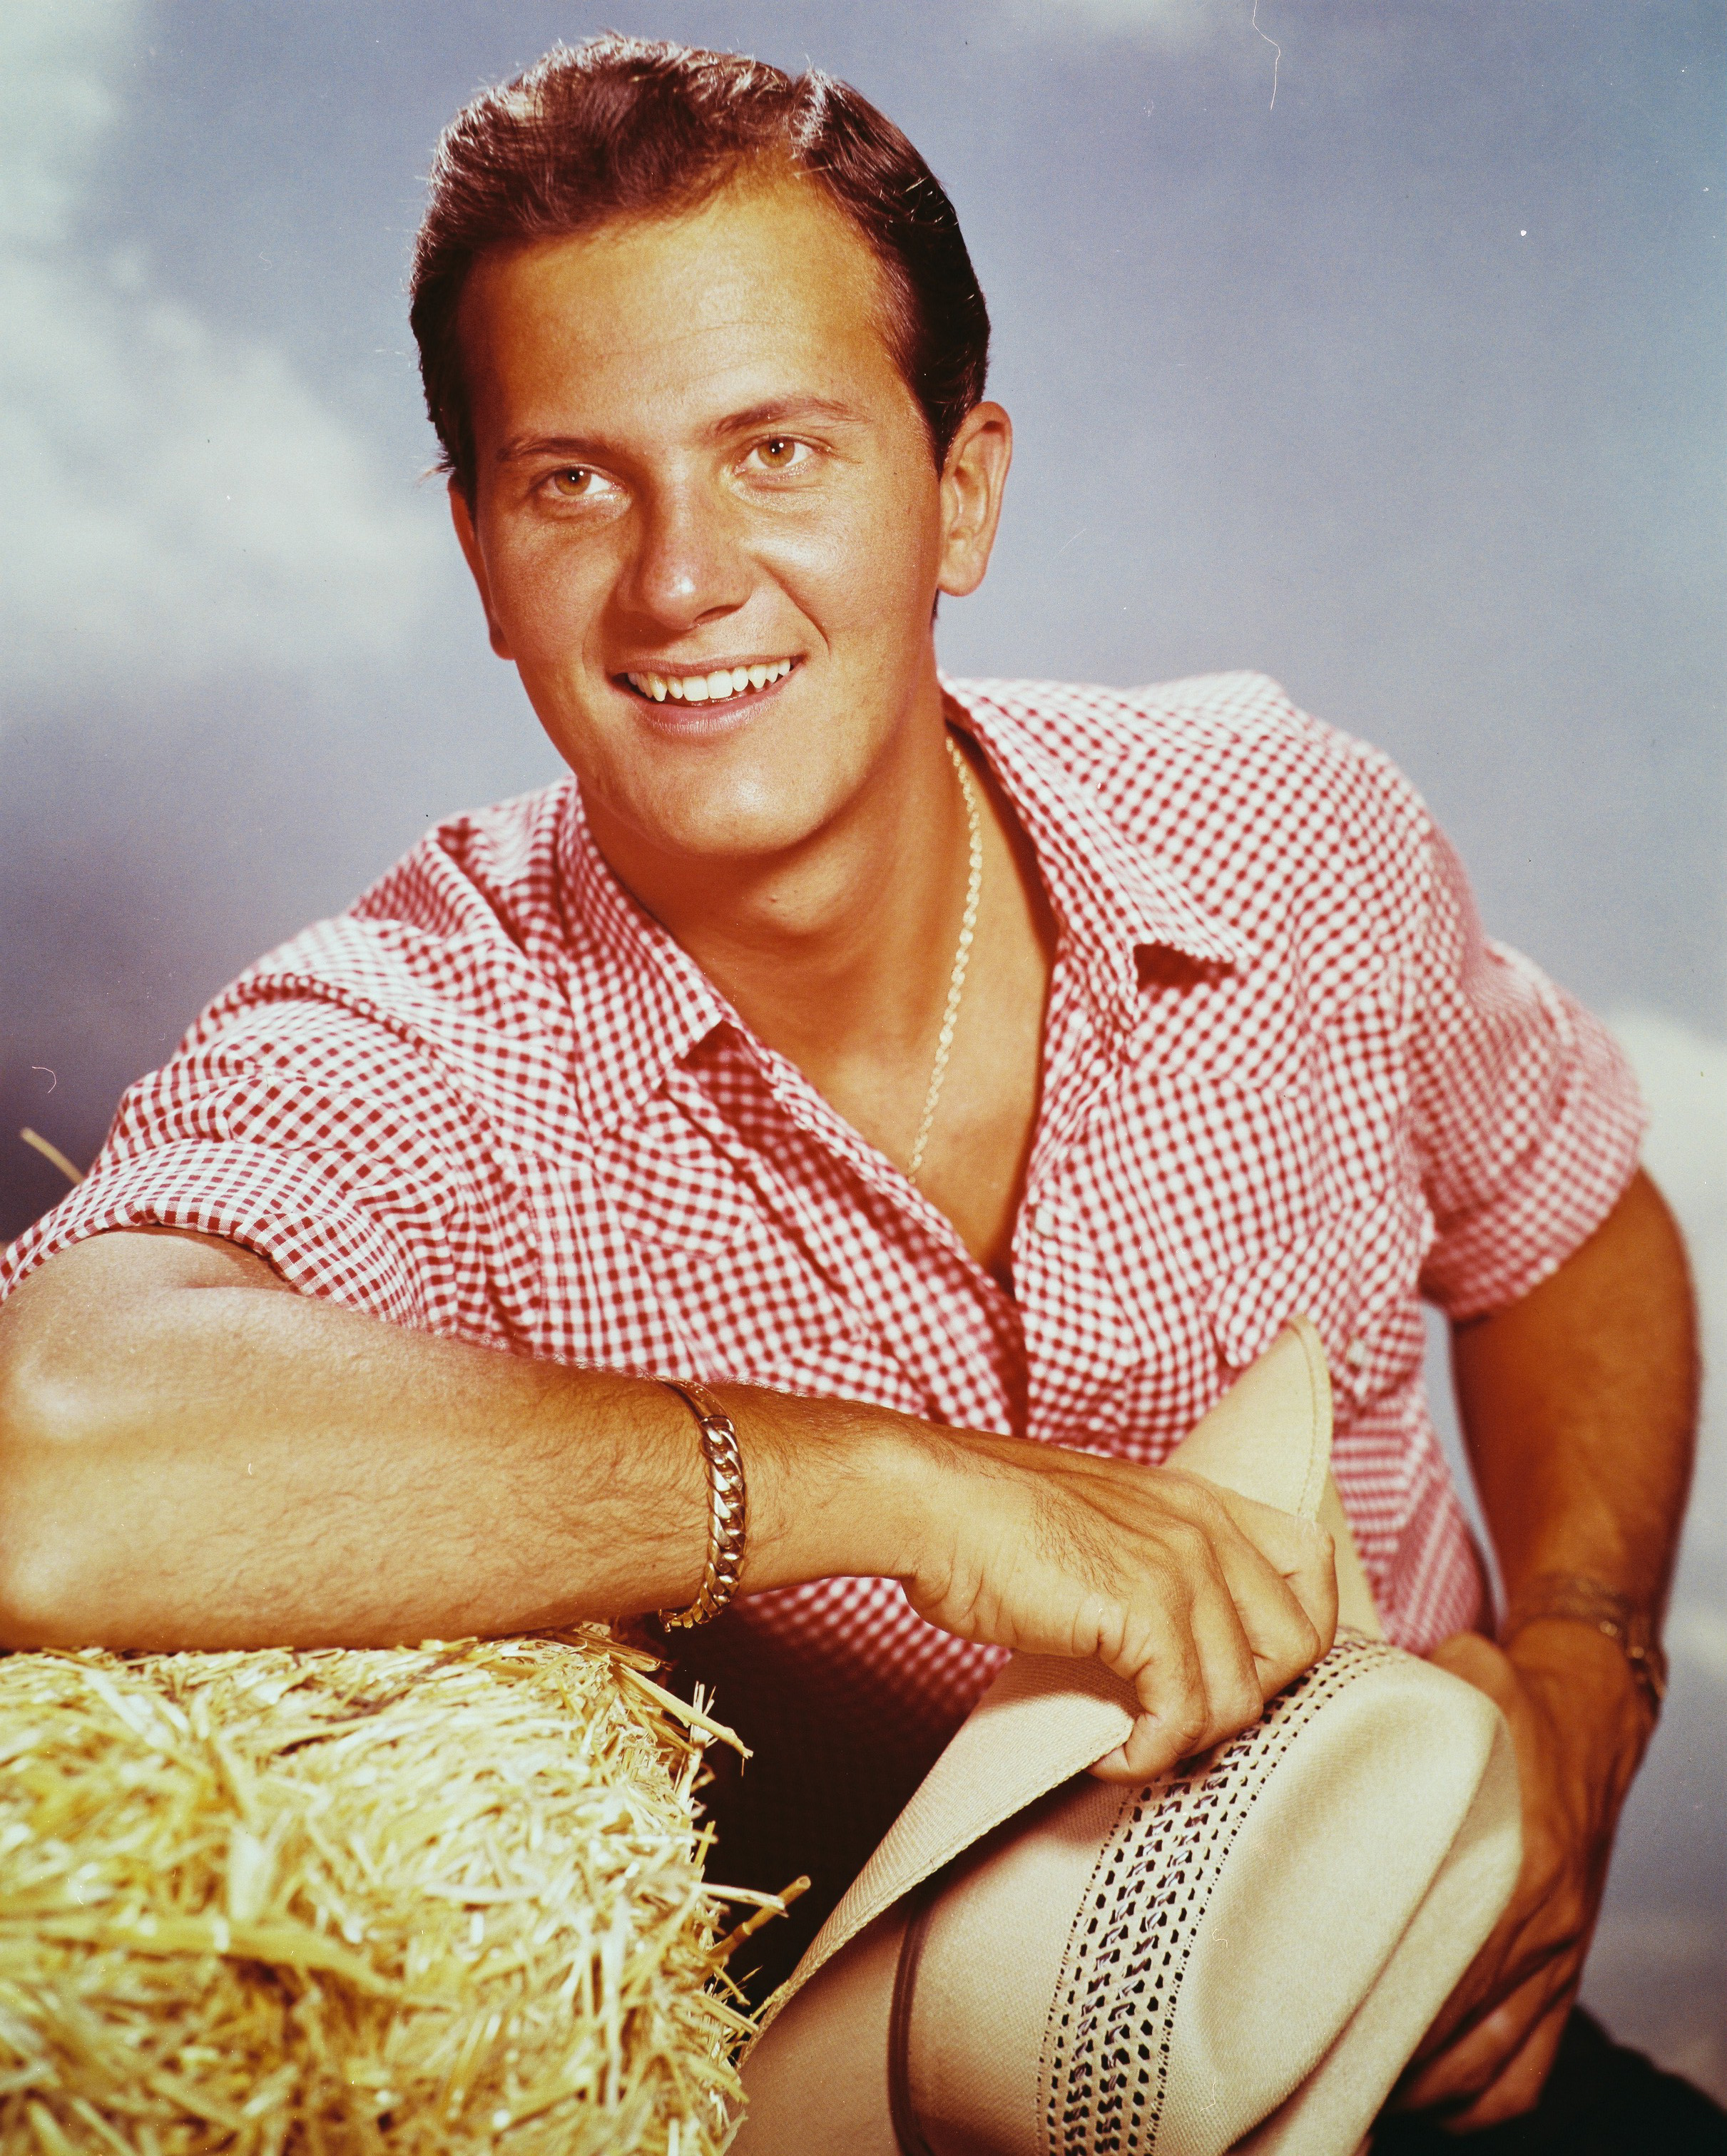 Pat Boone photographed in 1960 | Source: Getty Images